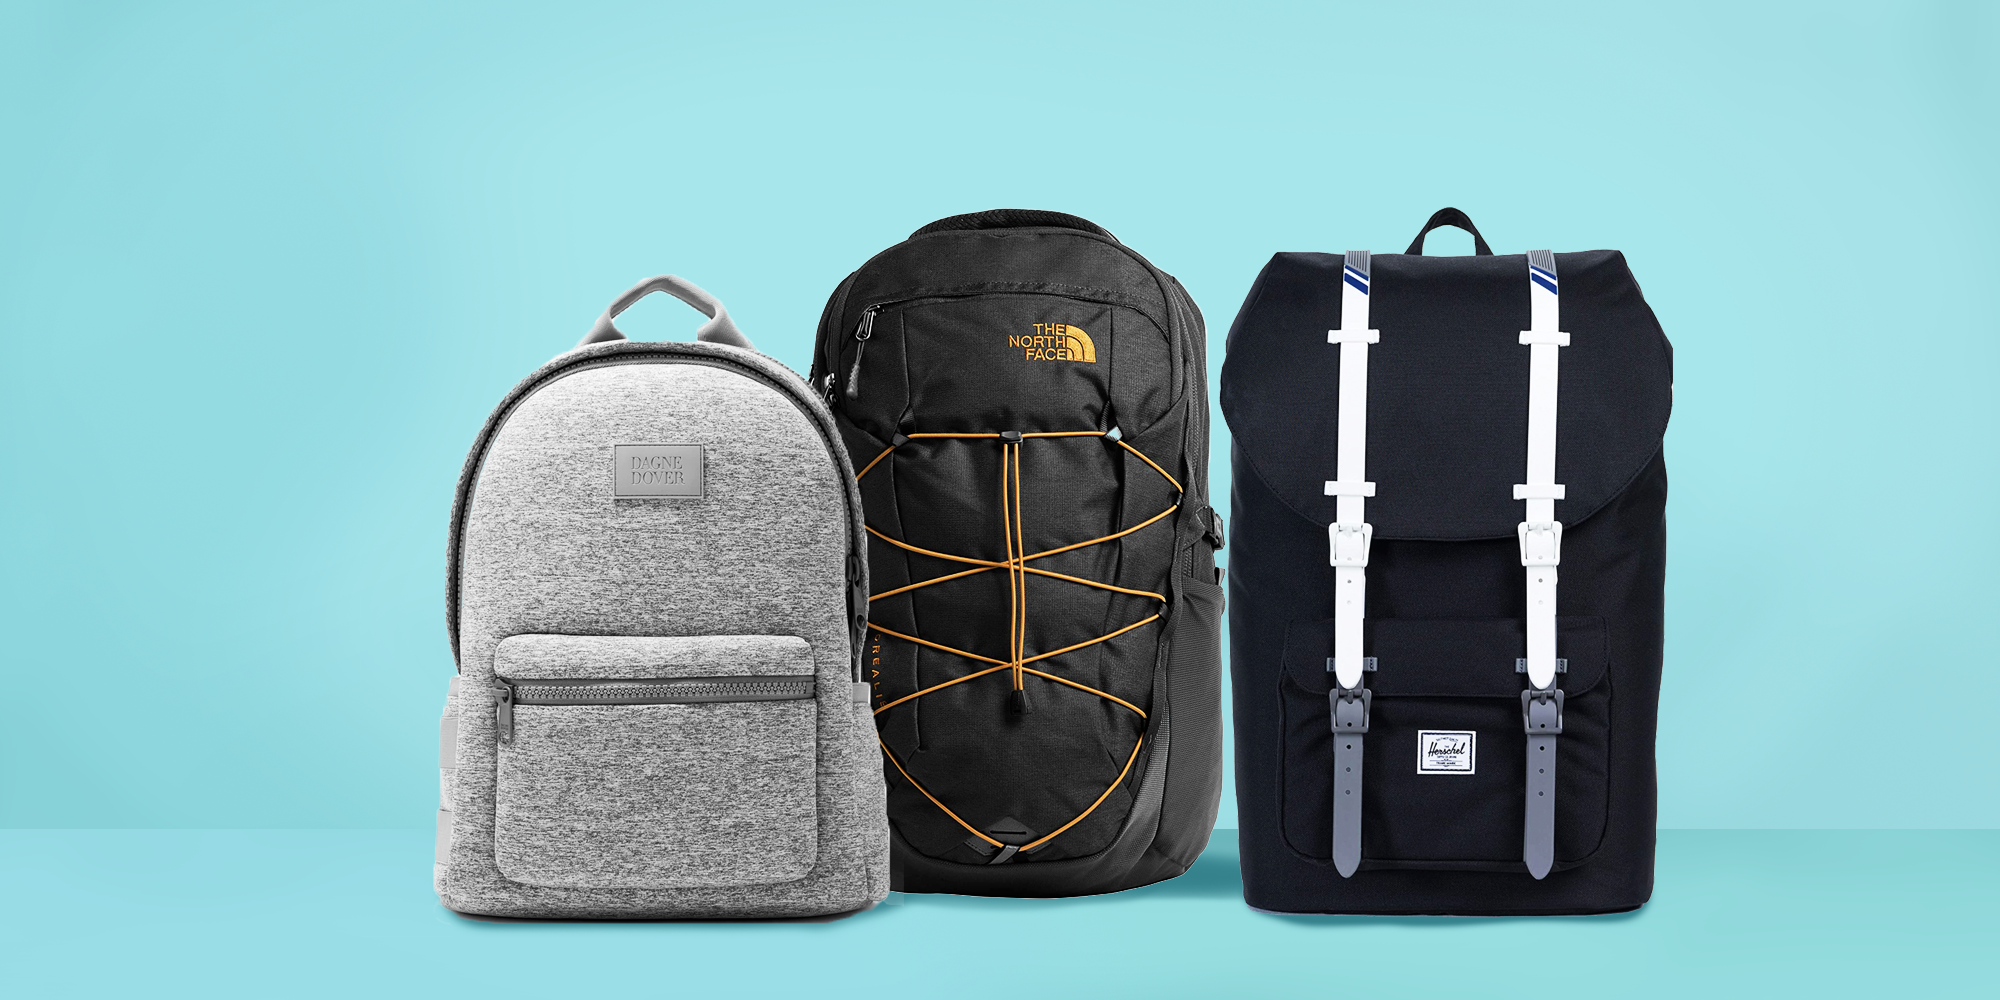 Best North Face Backpack For College